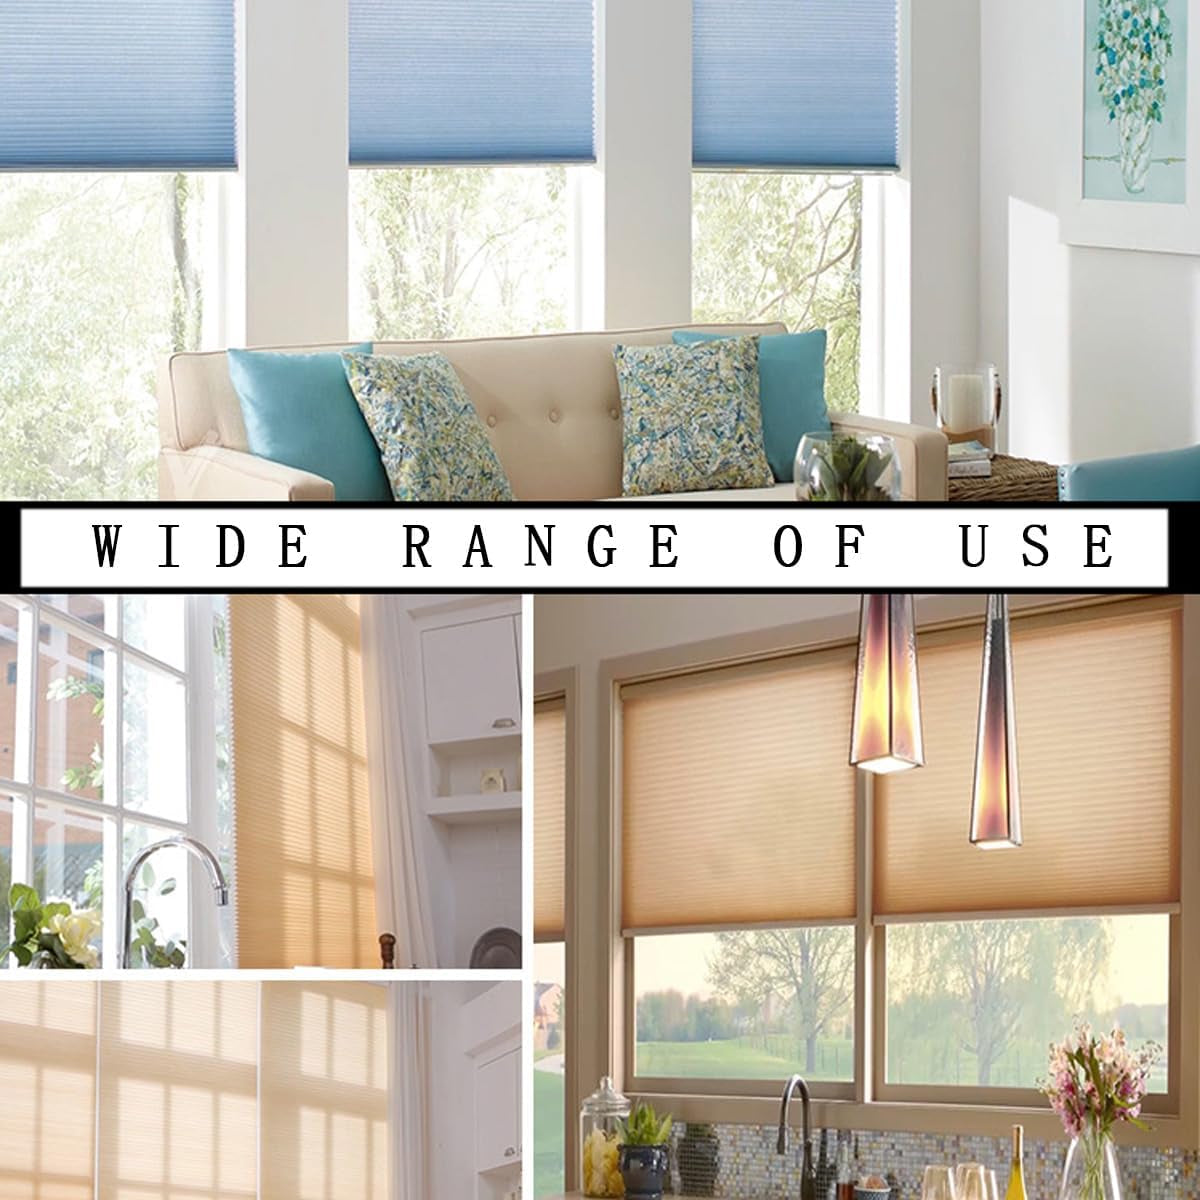 6 PCS Blinds Cordless Handles Clear Mini Plastic Honeycomb Roller Shades Hem Grips Shade Window Lift Handles Curtain Hardware Hooks for PVC Cordless Blinds Bottom Rail Roller Blinds Accessories